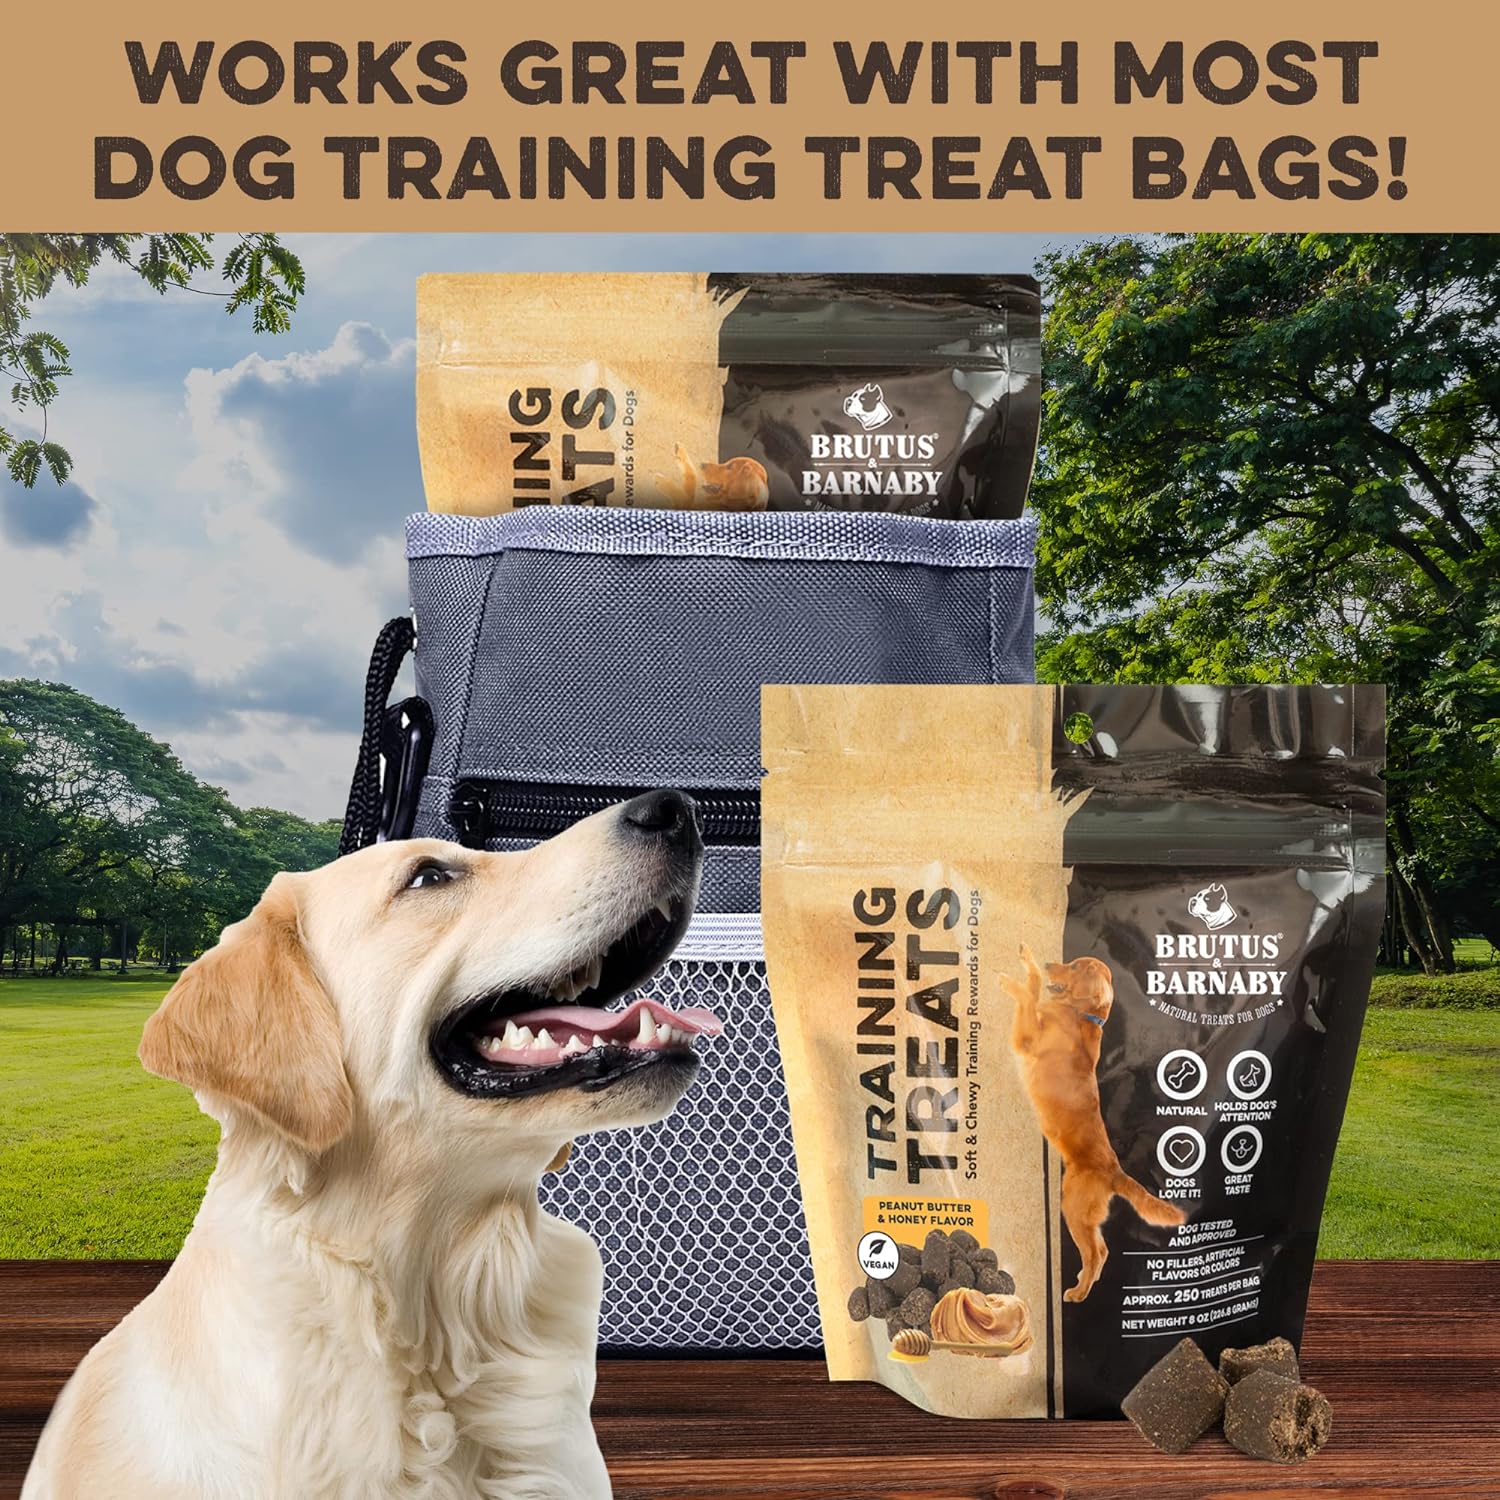 BRUTUS & BARNABY Training Treats for Dogs - Peanut Butter & Honey - All-Natural Healthy Low Calorie Vegetarian Treat - Great to Use for Rewards in Training Your Puppy Or Dog : Pet Supplies